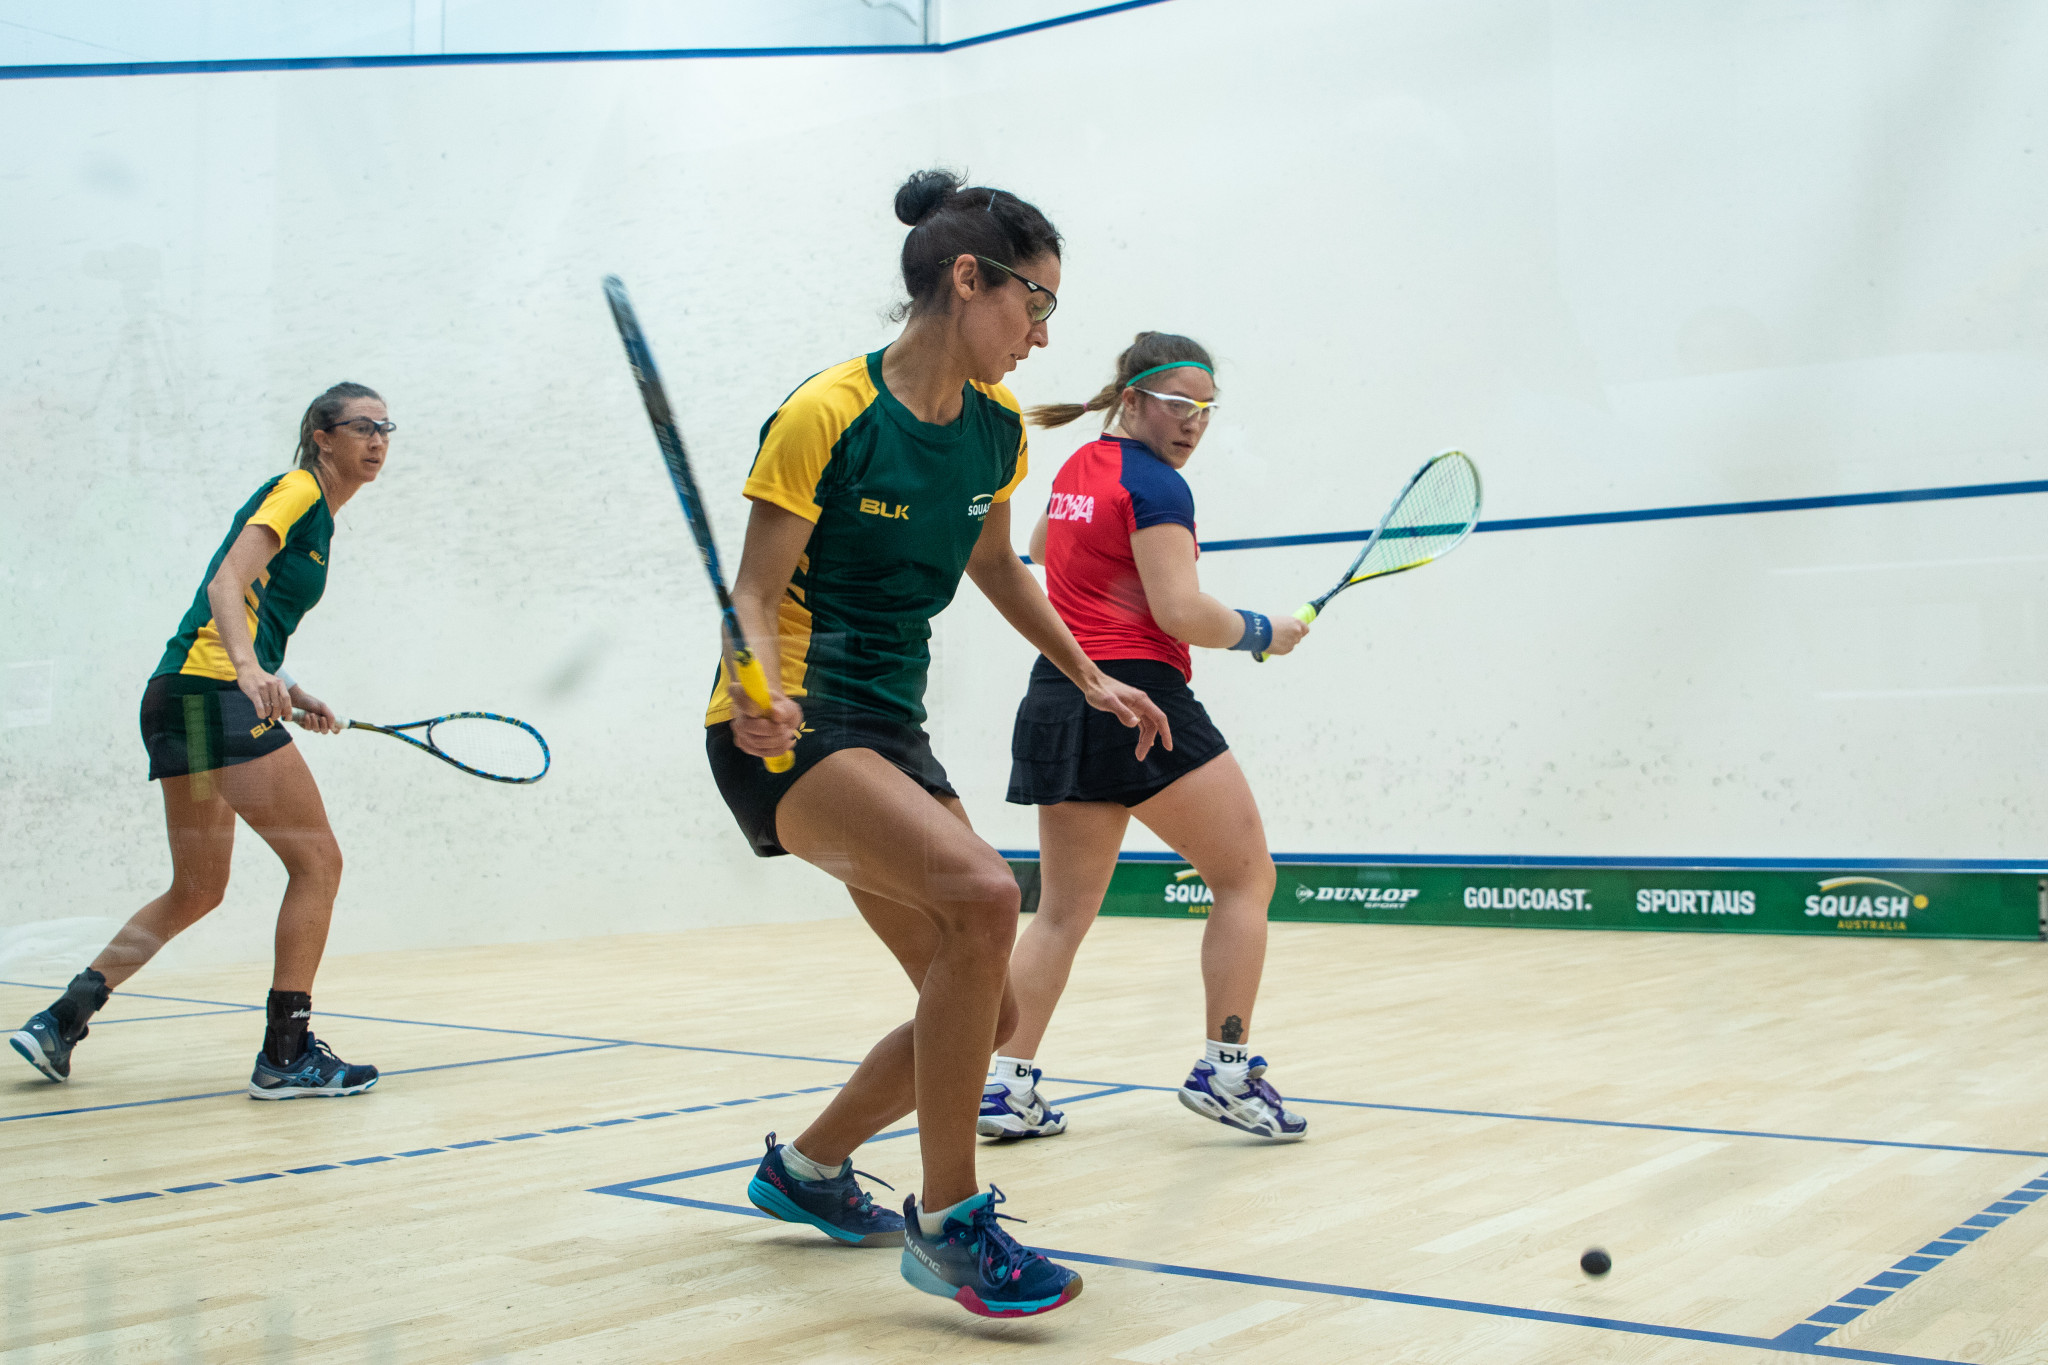 Donna Lobban and Christine Nunn won their first match of the WSF World Doubles Squash Championships ©WSF